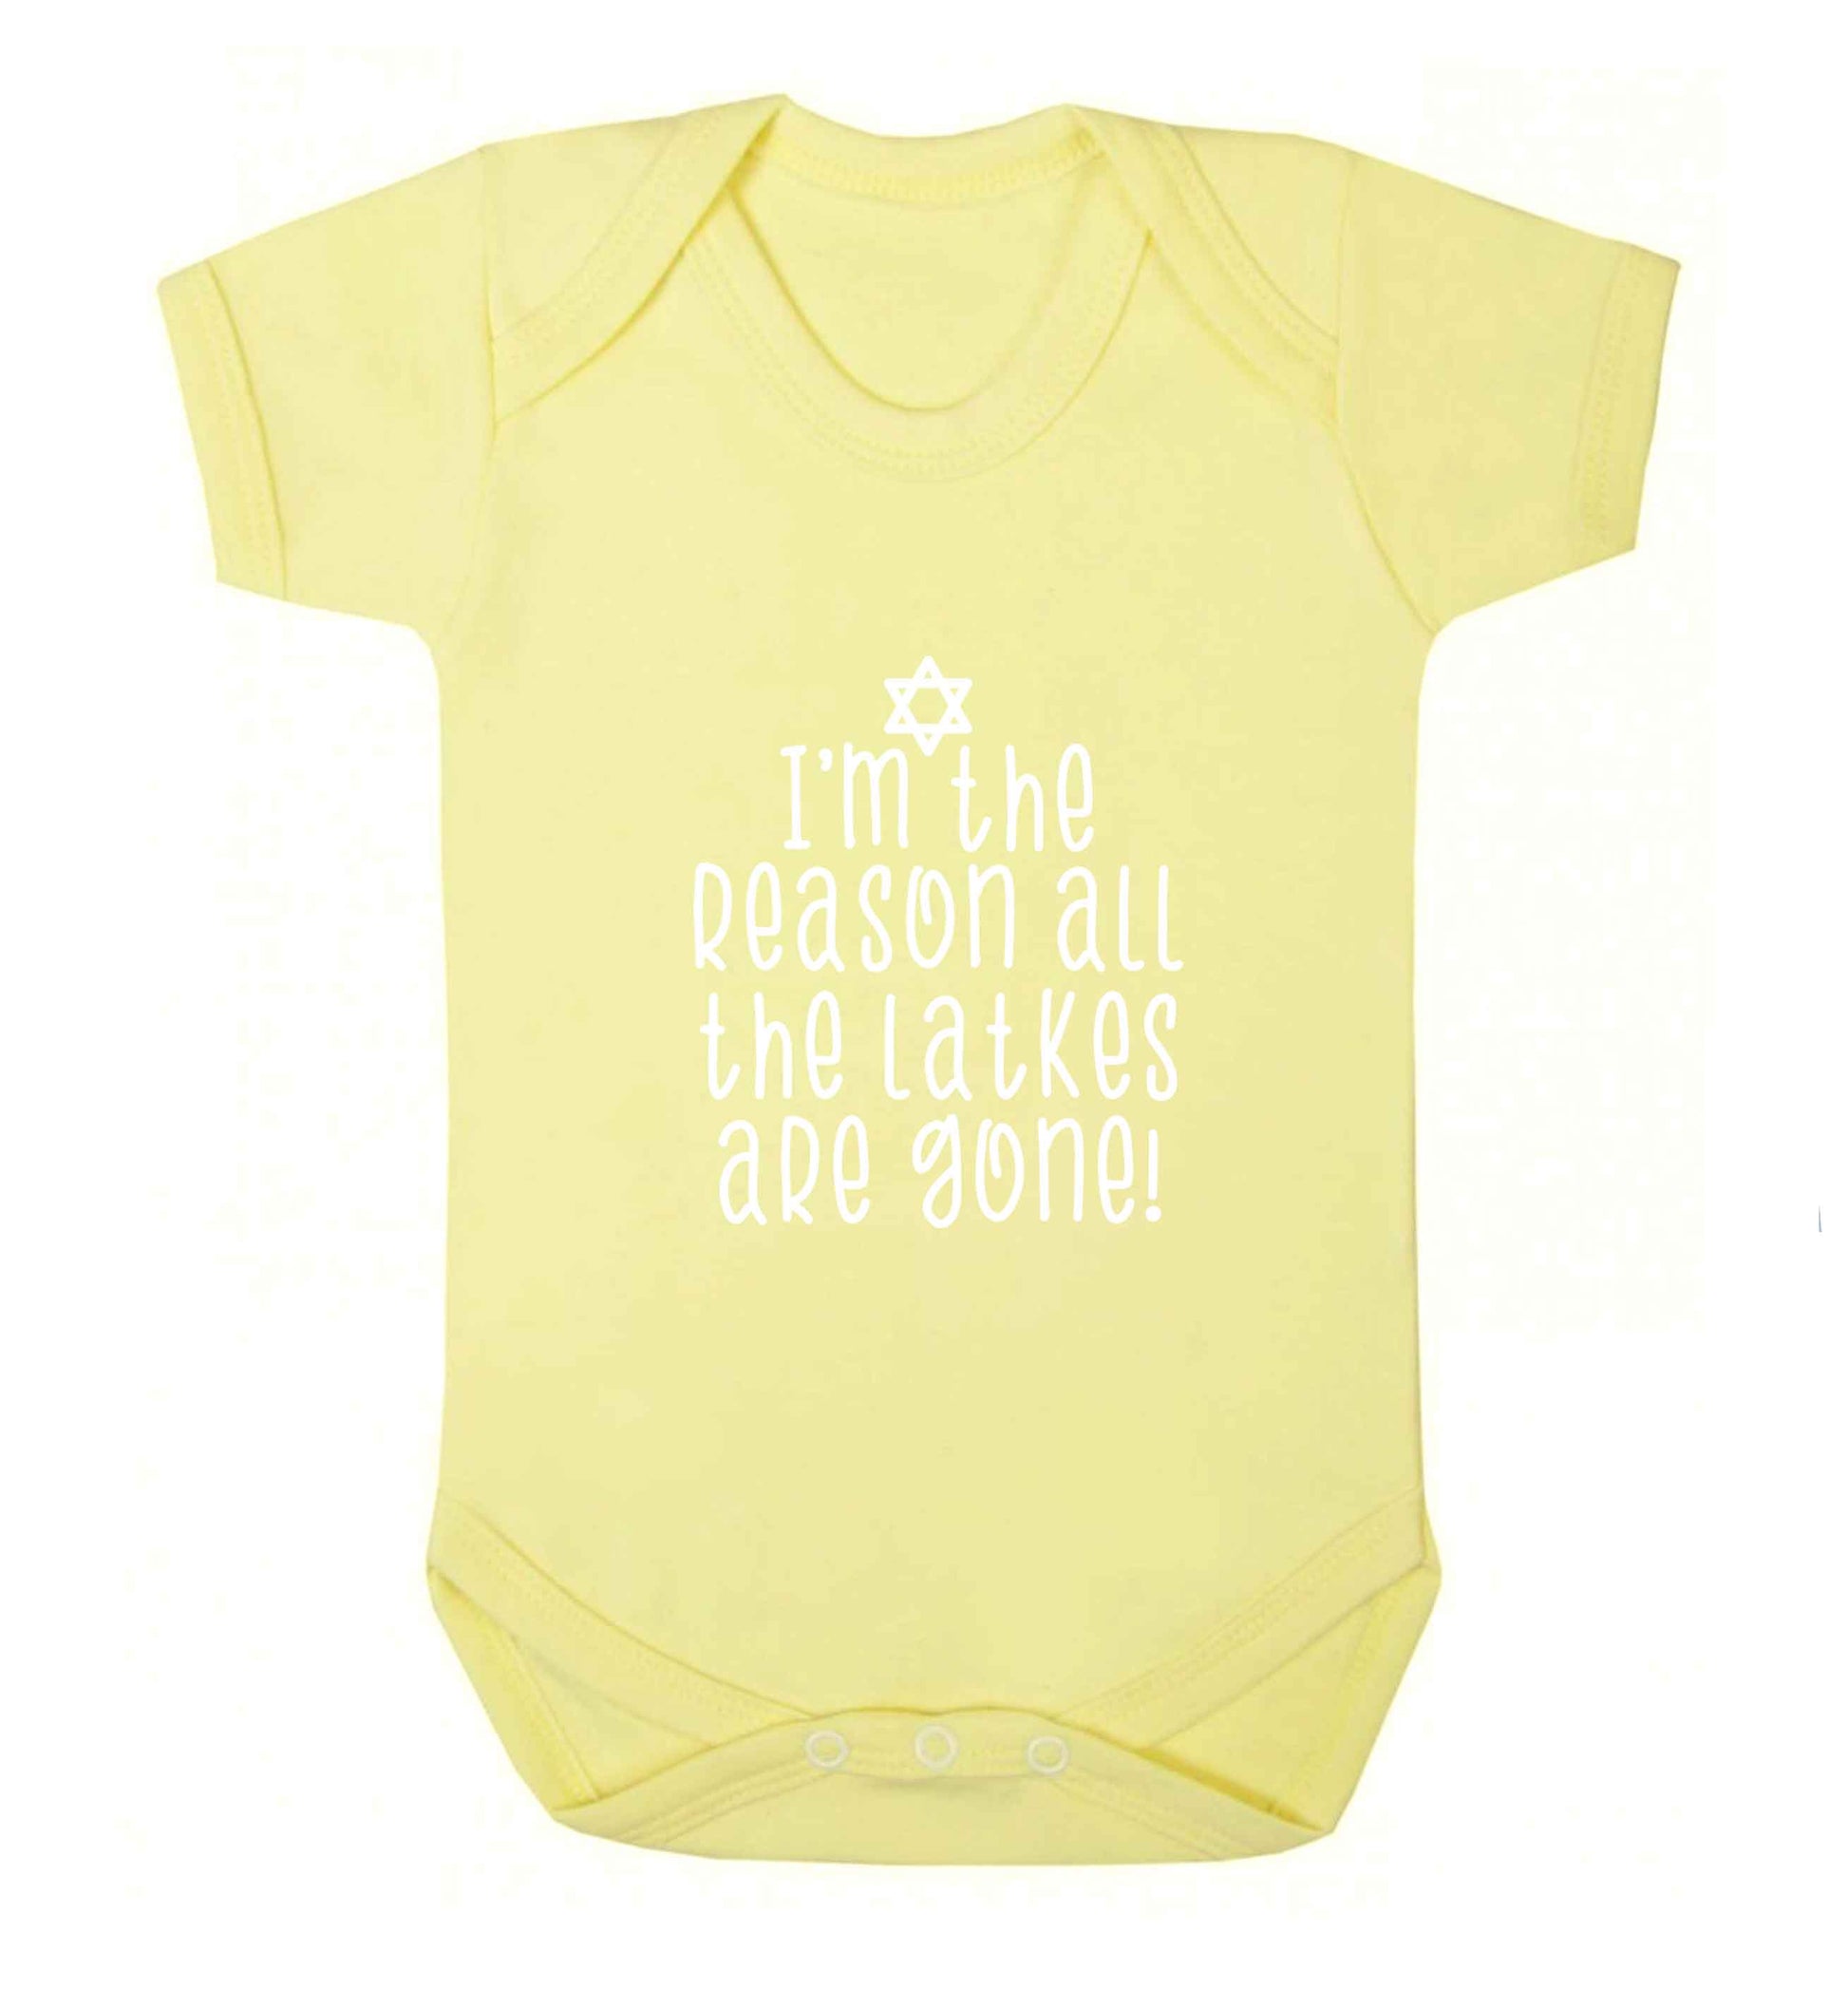 I'm the reason all the latkes are gone baby vest pale yellow 18-24 months